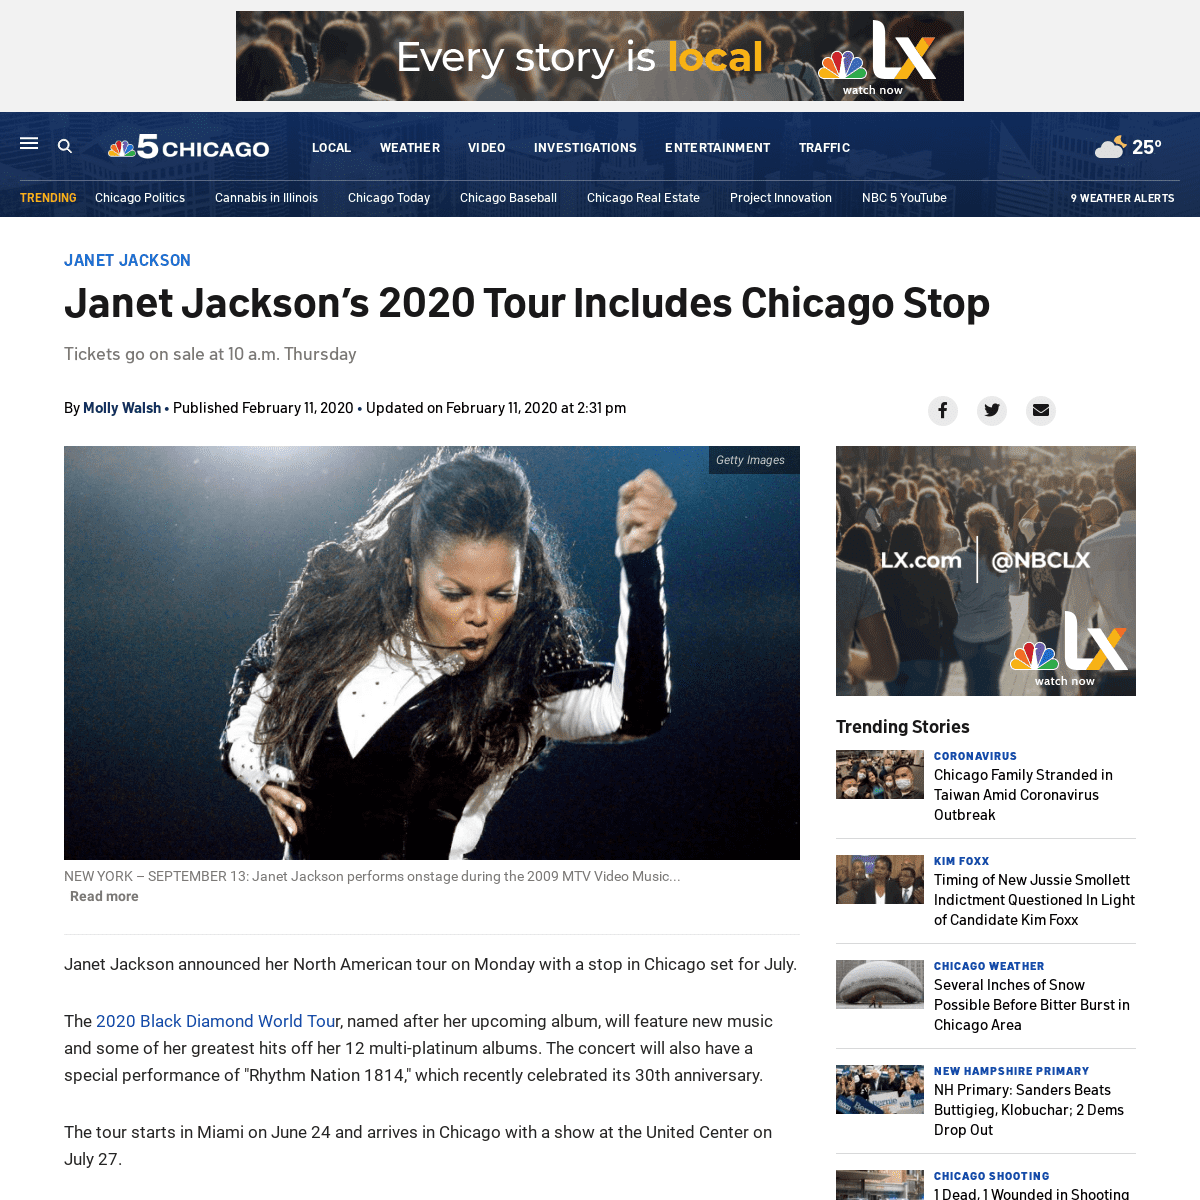 A complete backup of www.nbcchicago.com/news/local/worth-the-trip/janet-jackson-2020-tour-includes-chicago/2217142/